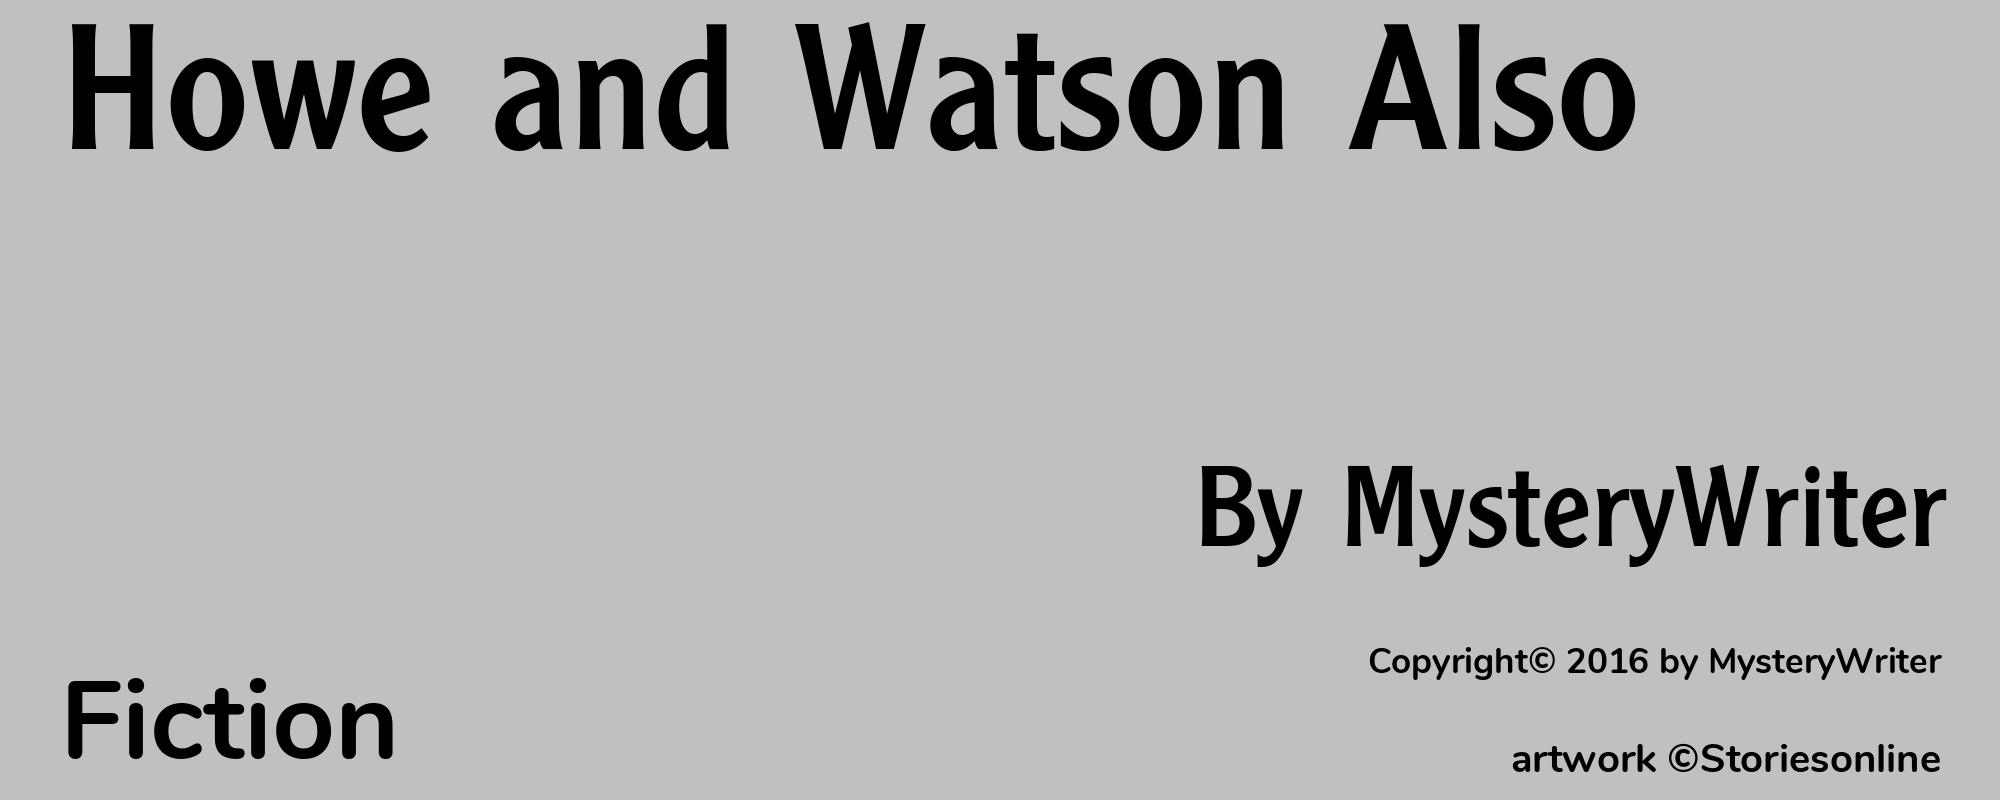 Howe and Watson Also - Cover